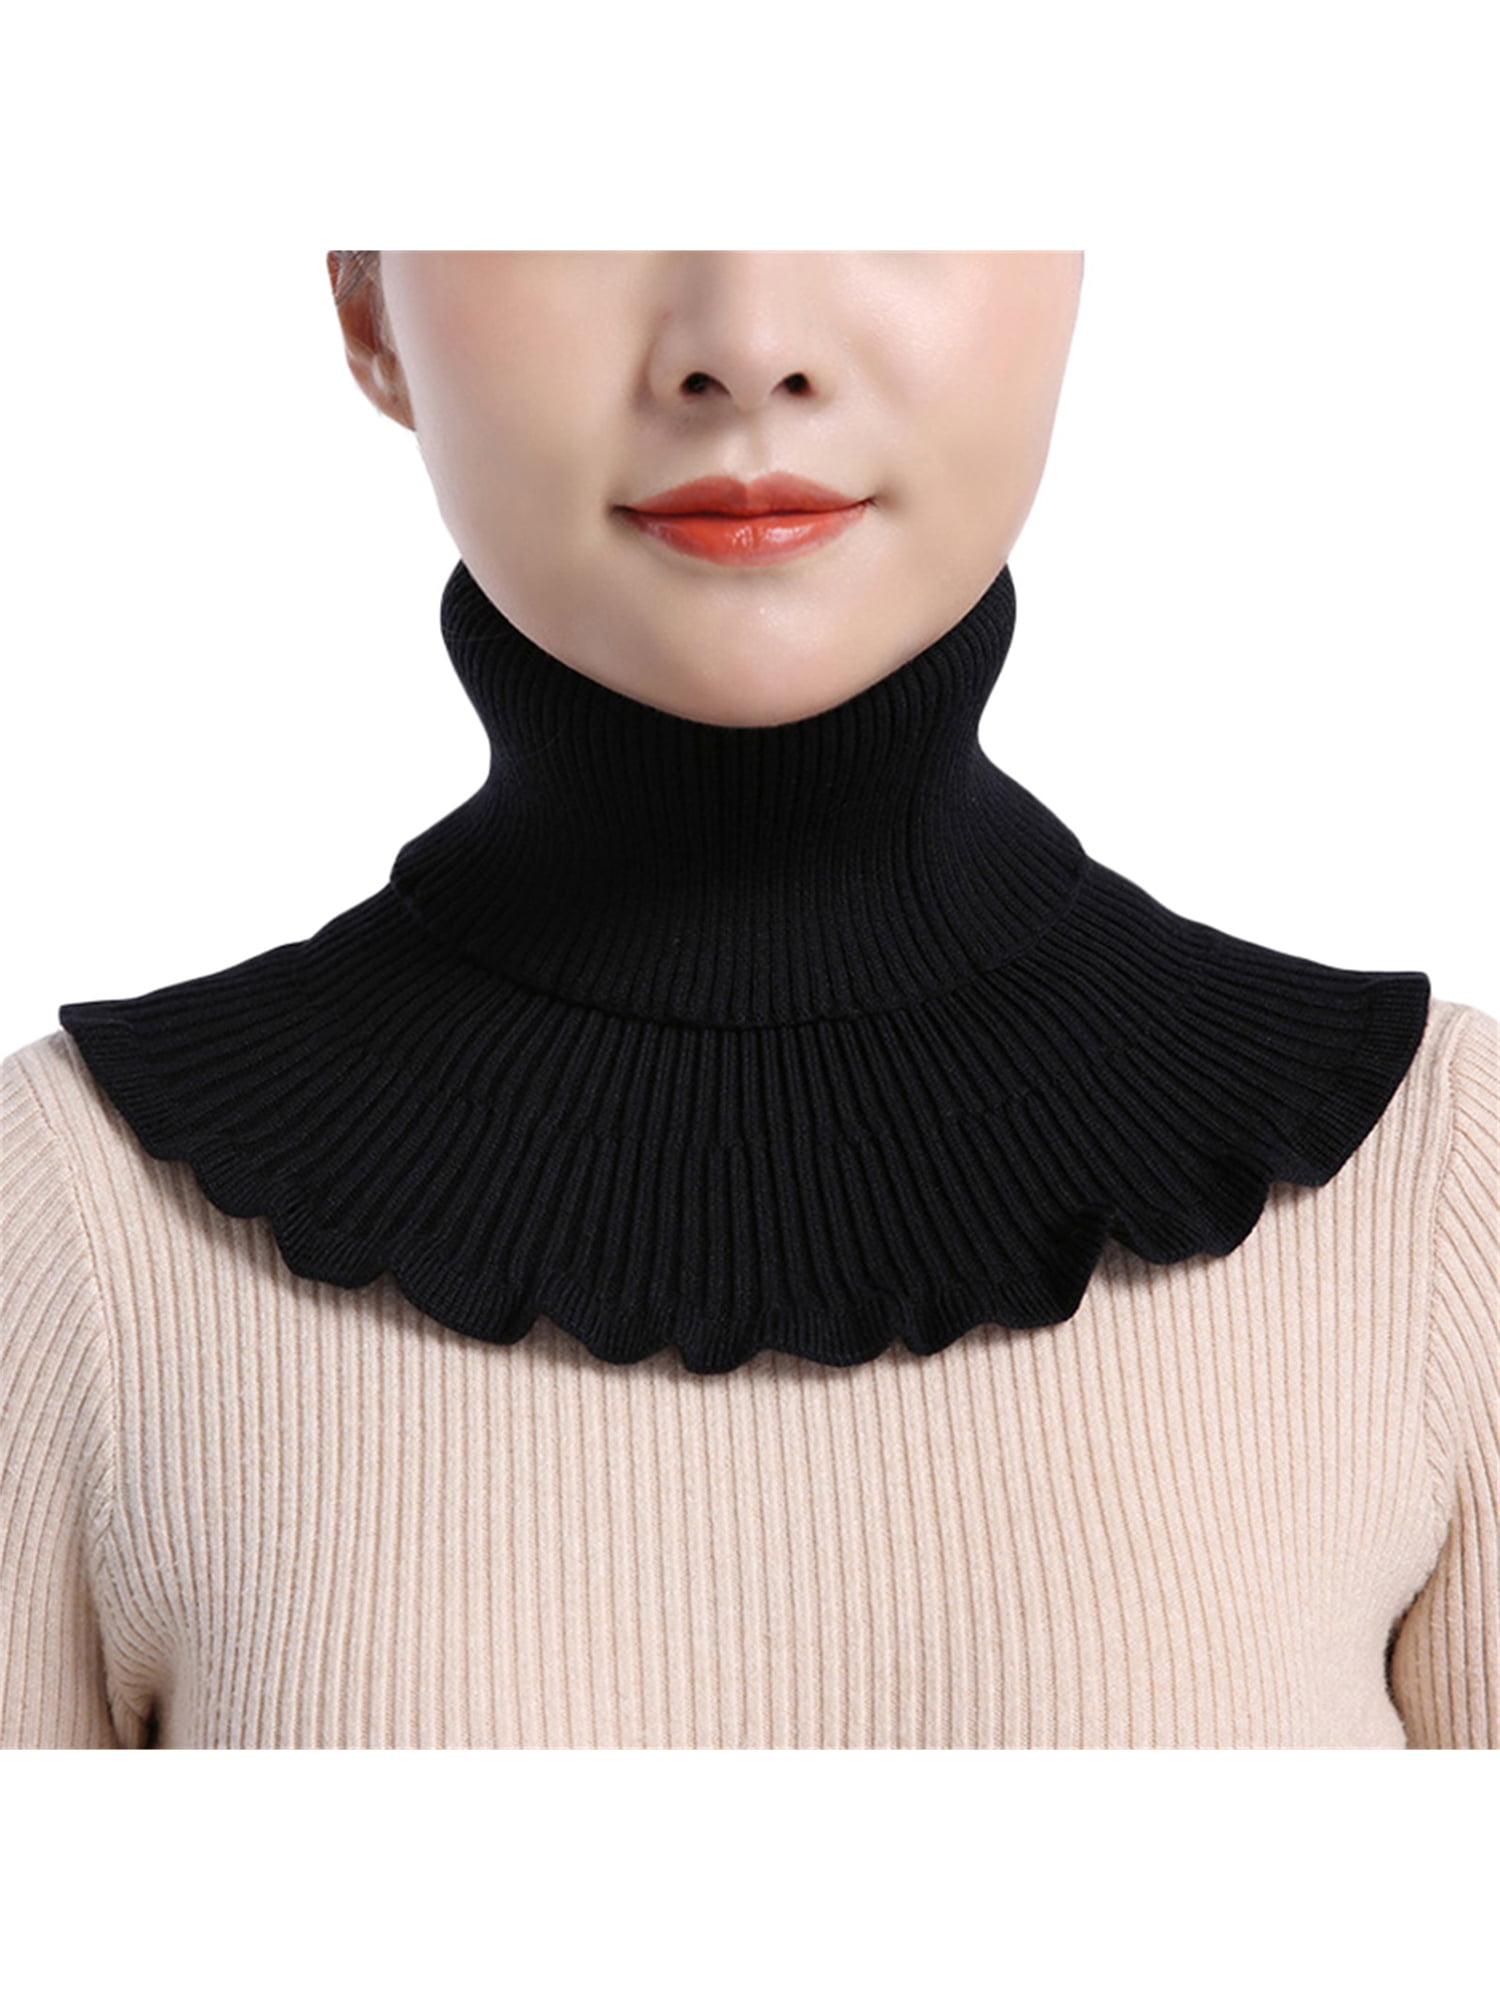 Order online Free Shipping Worldwide Detachable Fake Faux Neck Cover ...